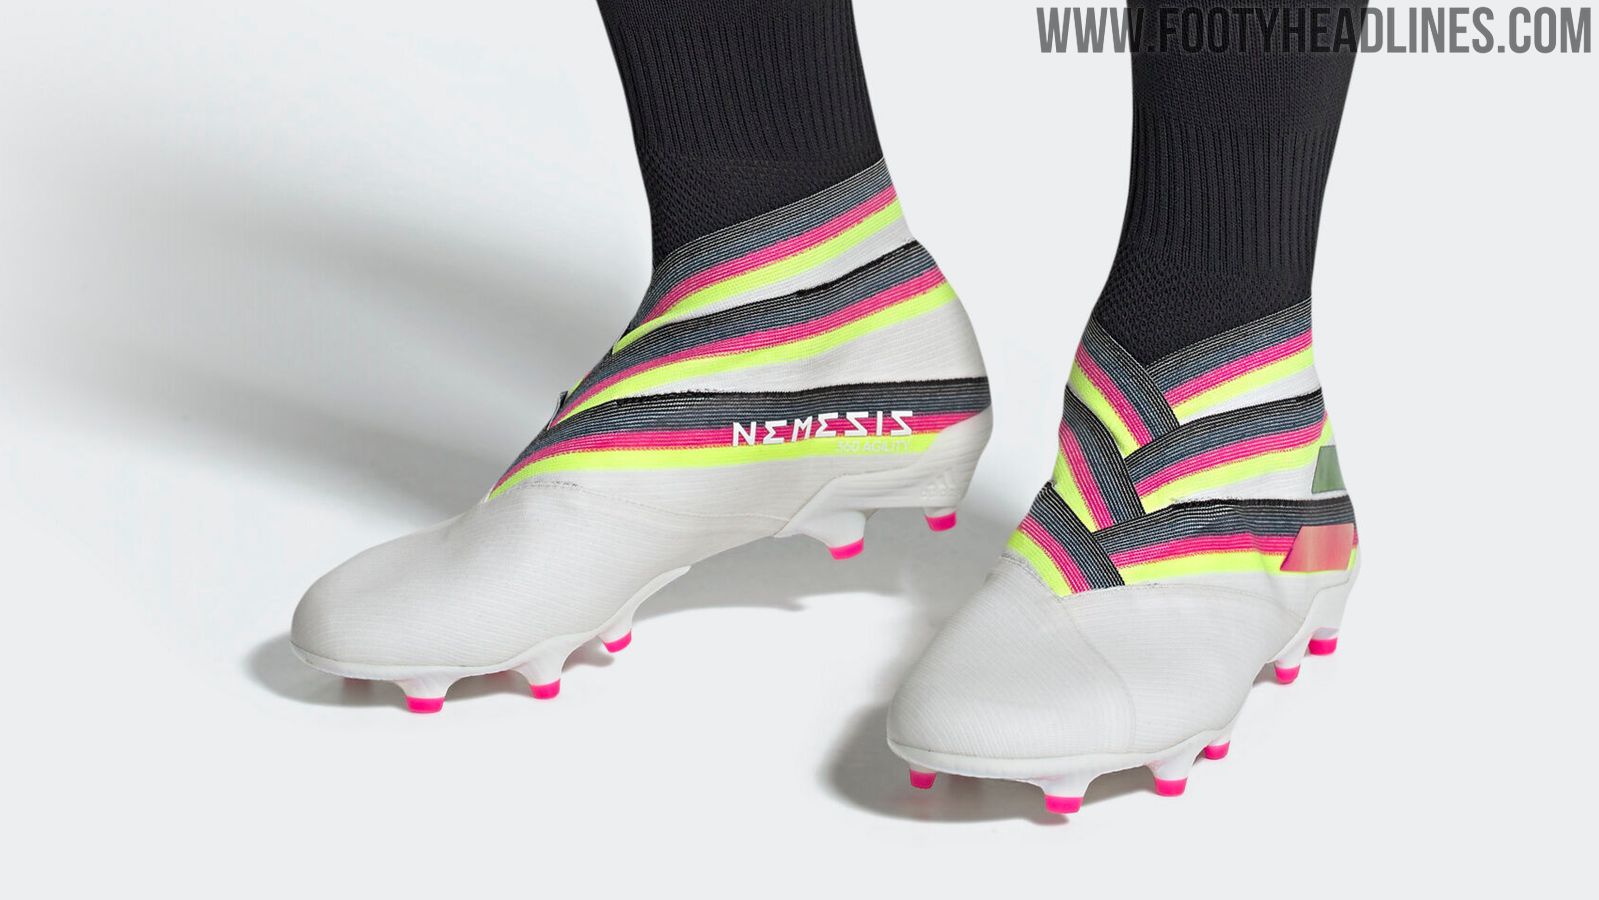 Mediate Deltage absorberende Crazy White / Multicolor Adidas Nemeziz 19+ 'Polarized' Limited-Edition  Boots Revealed - Footy Headlines